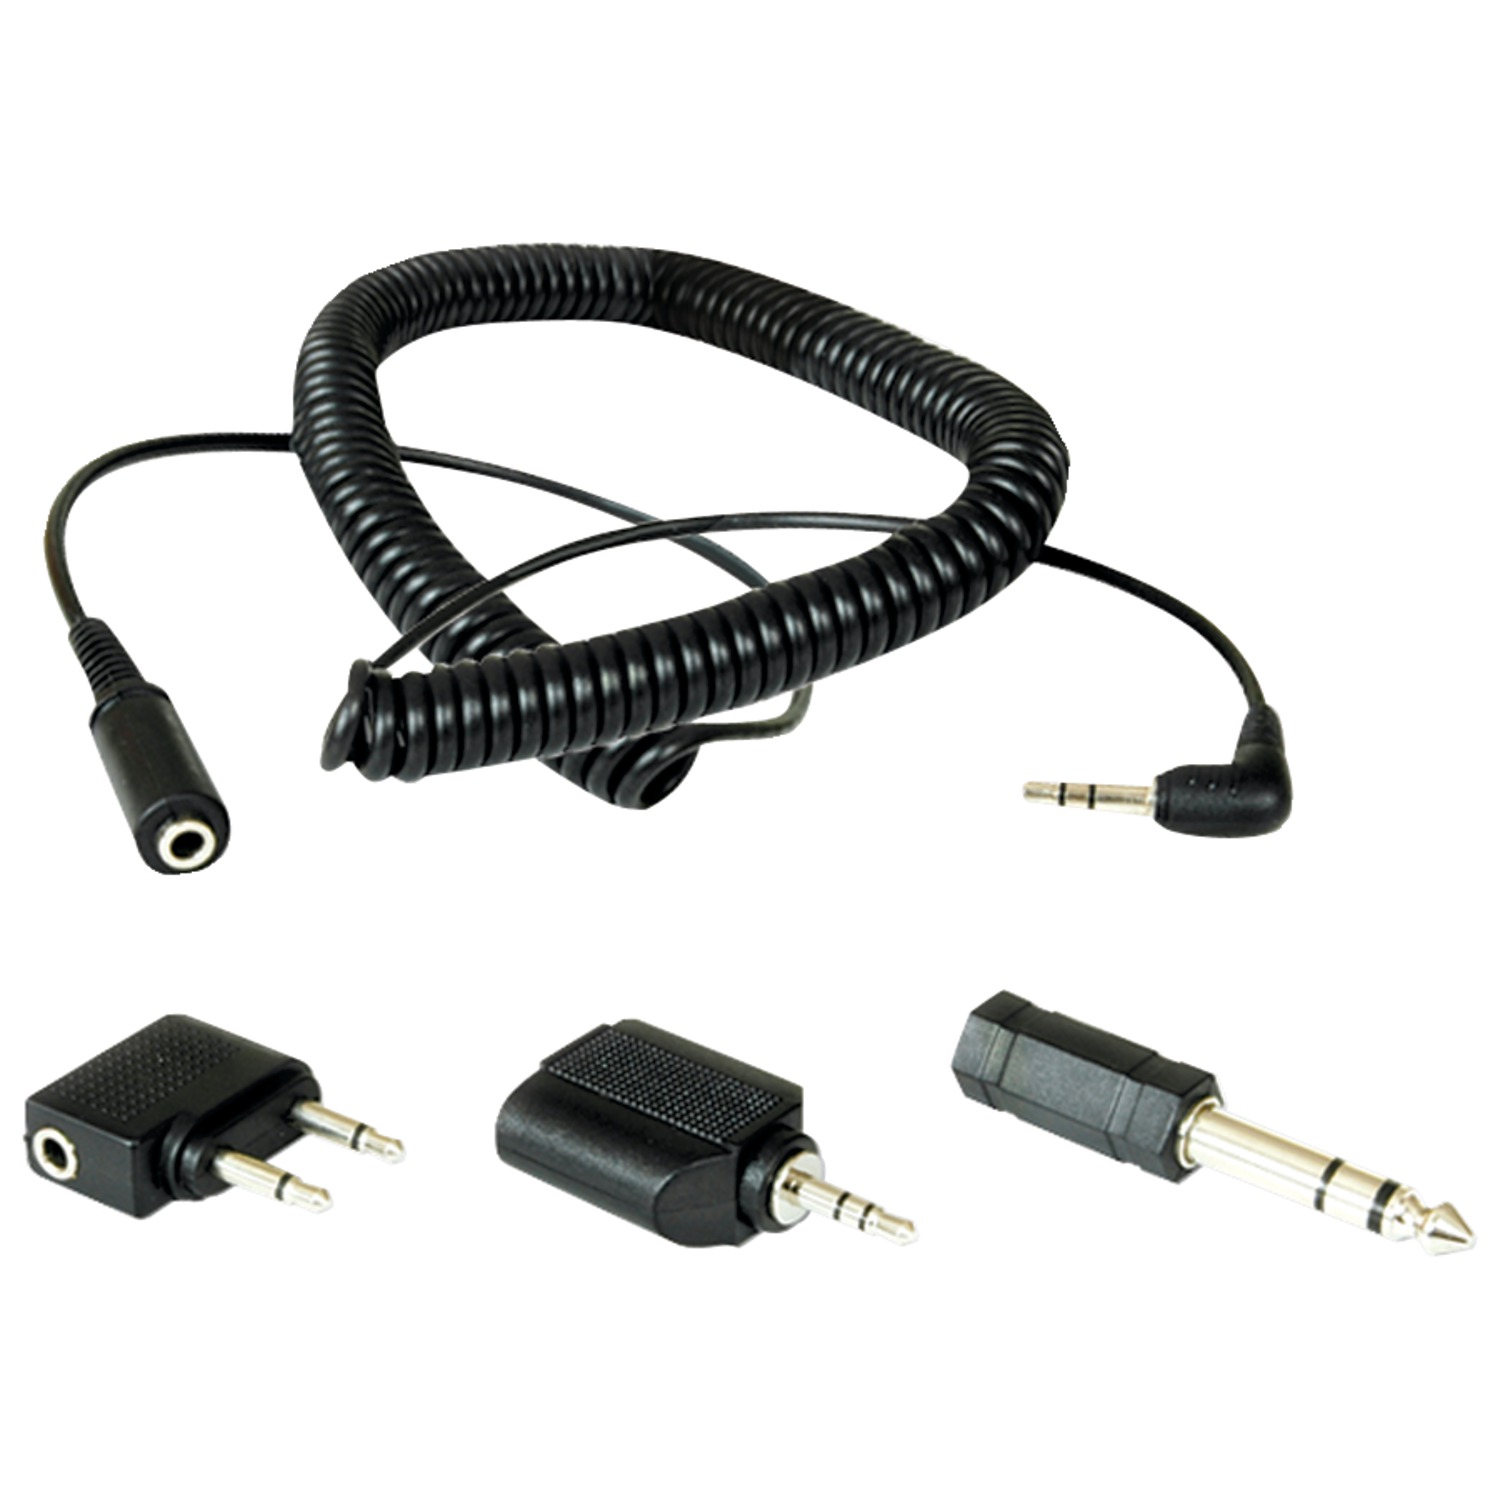 Maxell 190399 Headphone Extension Cord & Adapters - image 1 of 1